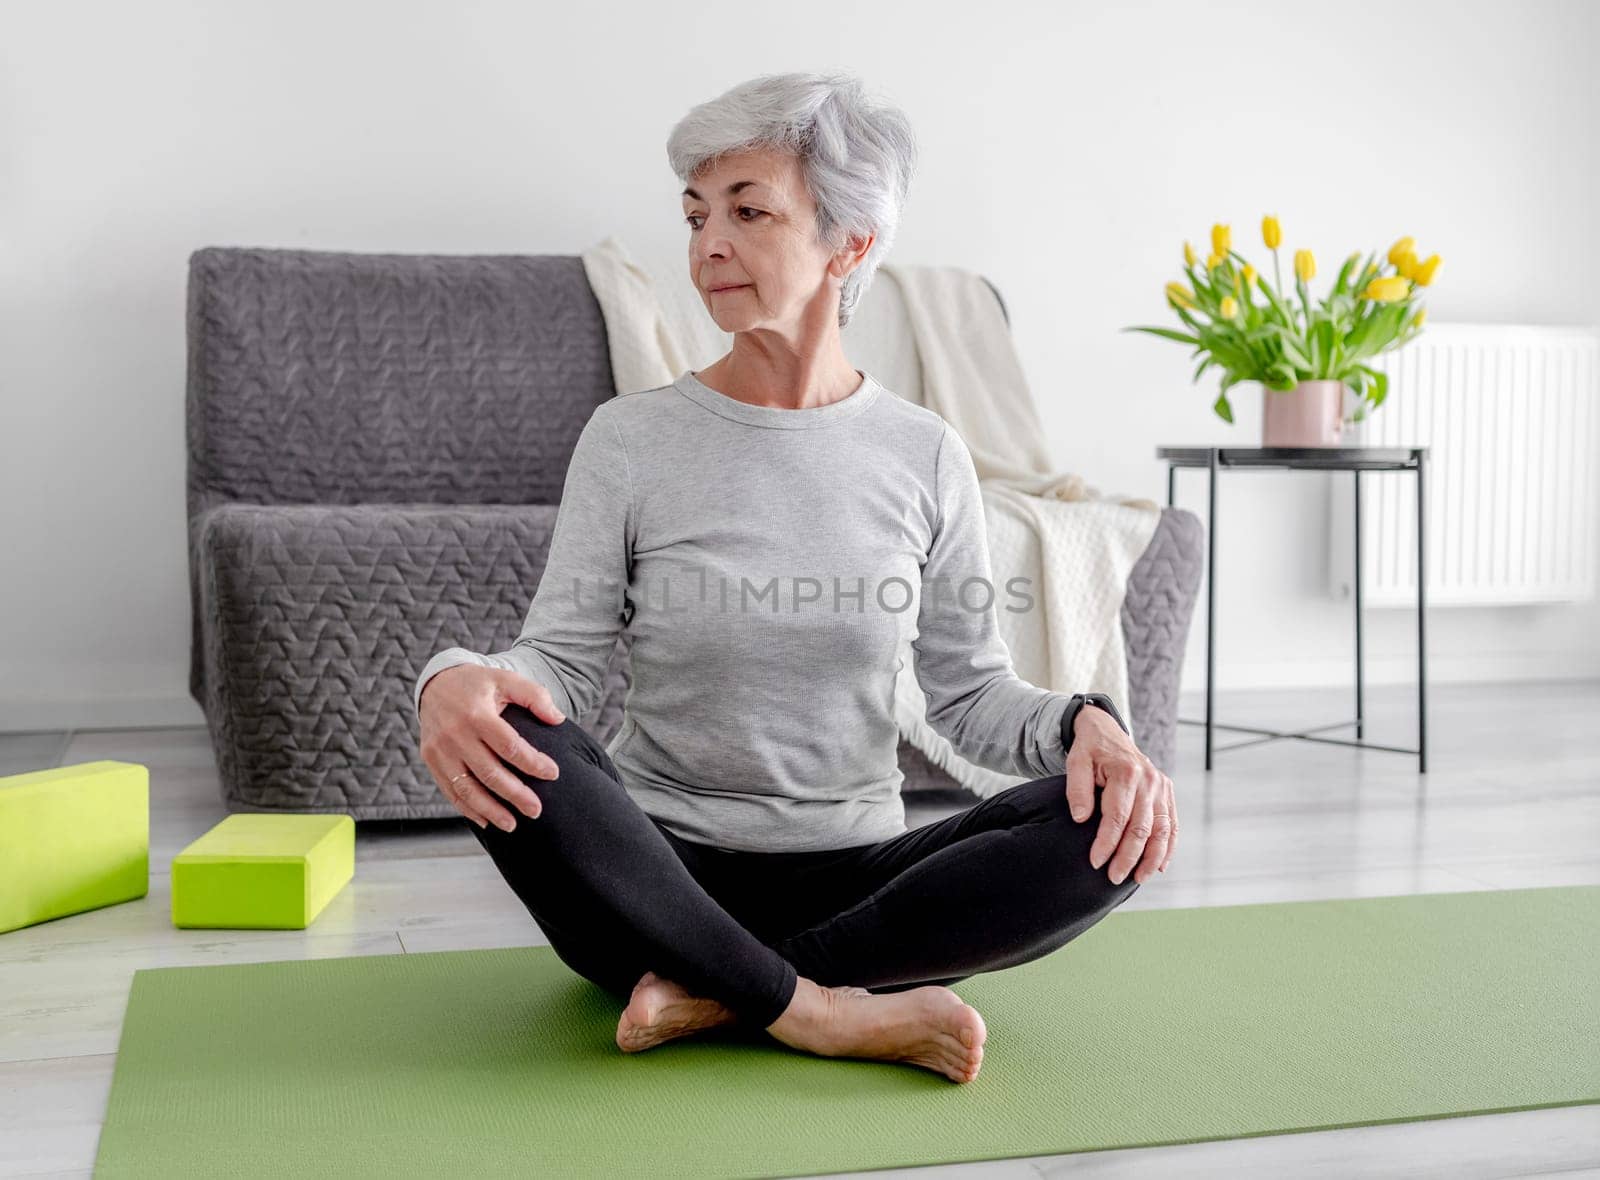 60 years old Woman Practices Yoga At Home by tan4ikk1